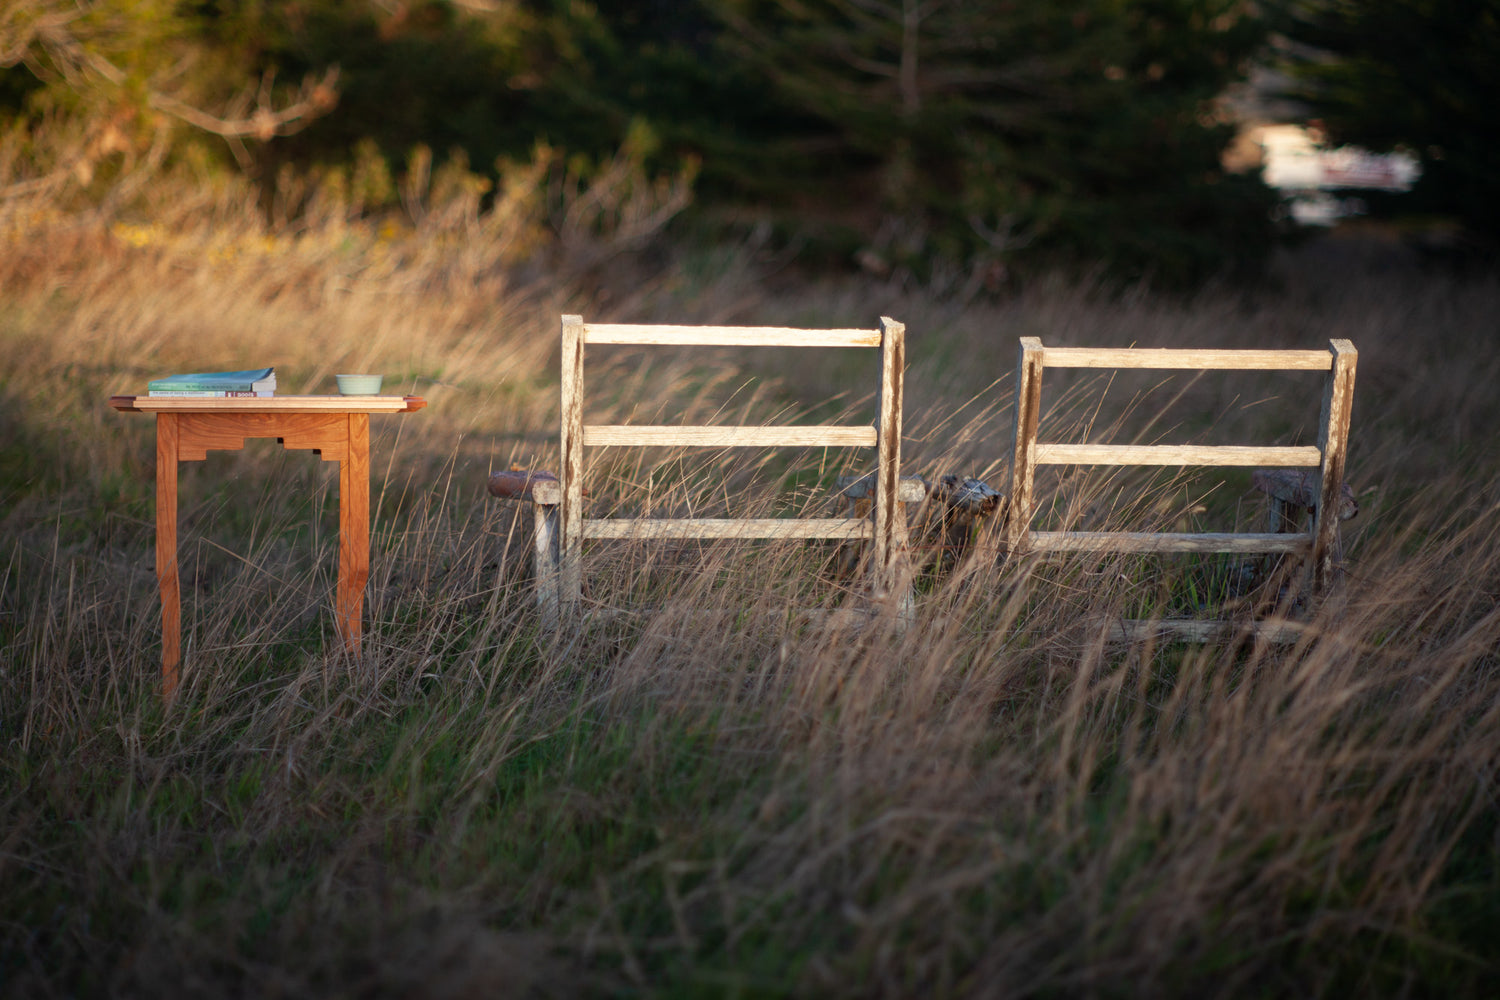 A 14 Acre Designs Cherry Wood Carved Side Table rests playfully beside two weathered chair frames in a field on the Mendocino Coast.